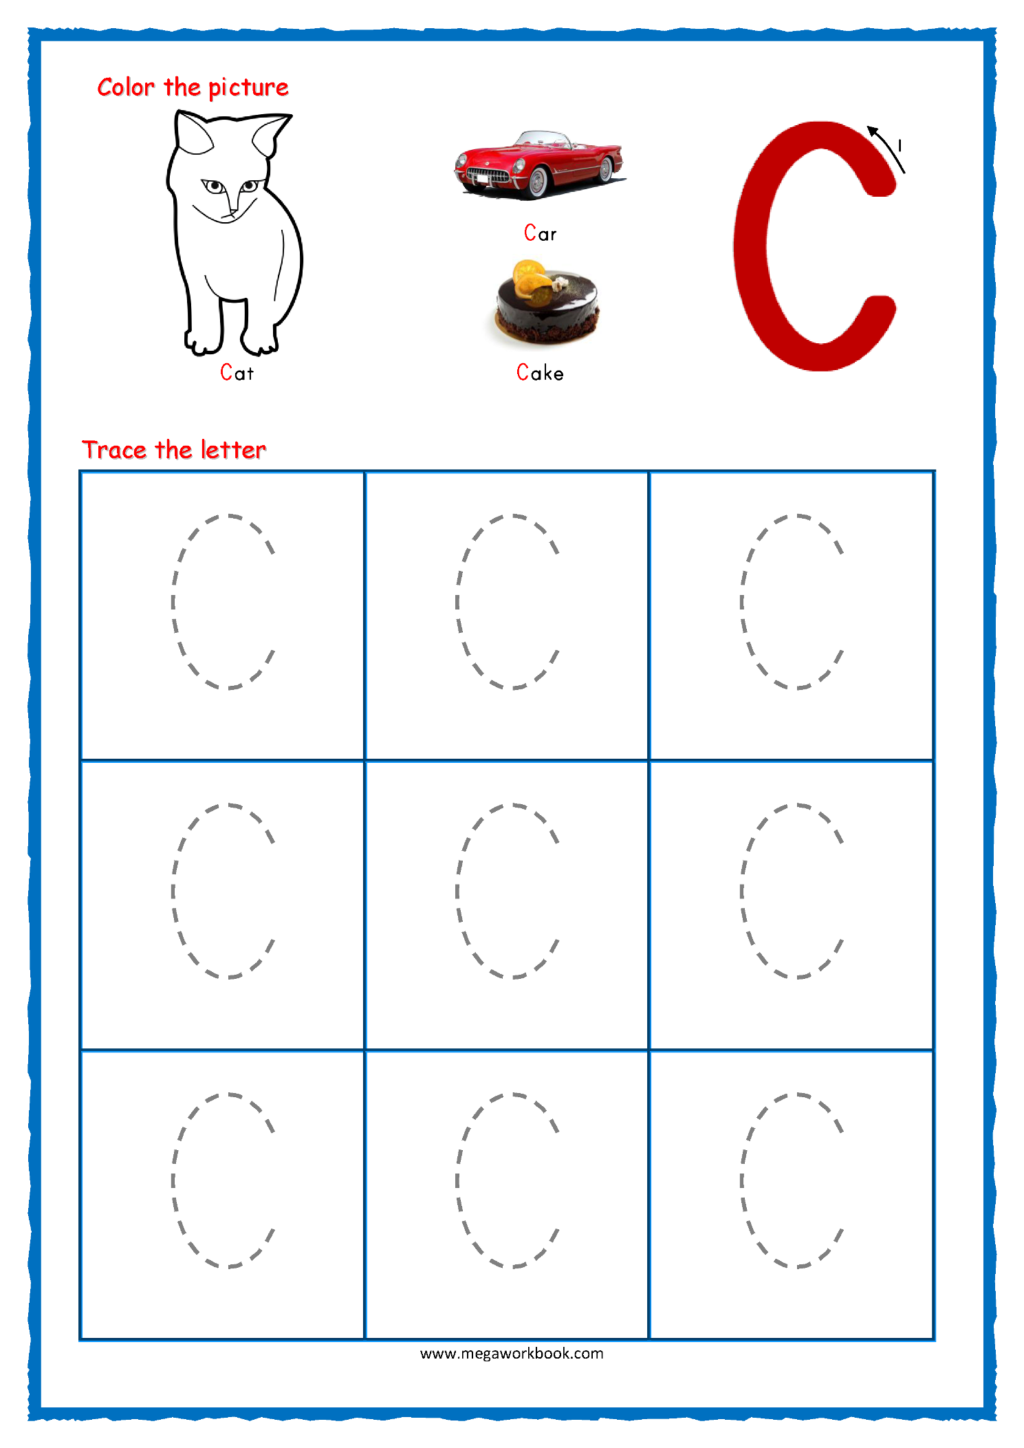 Math Worksheet ~ Alphabet Traceheets Printables Image Ideas with regard to Letter C Tracing Printable